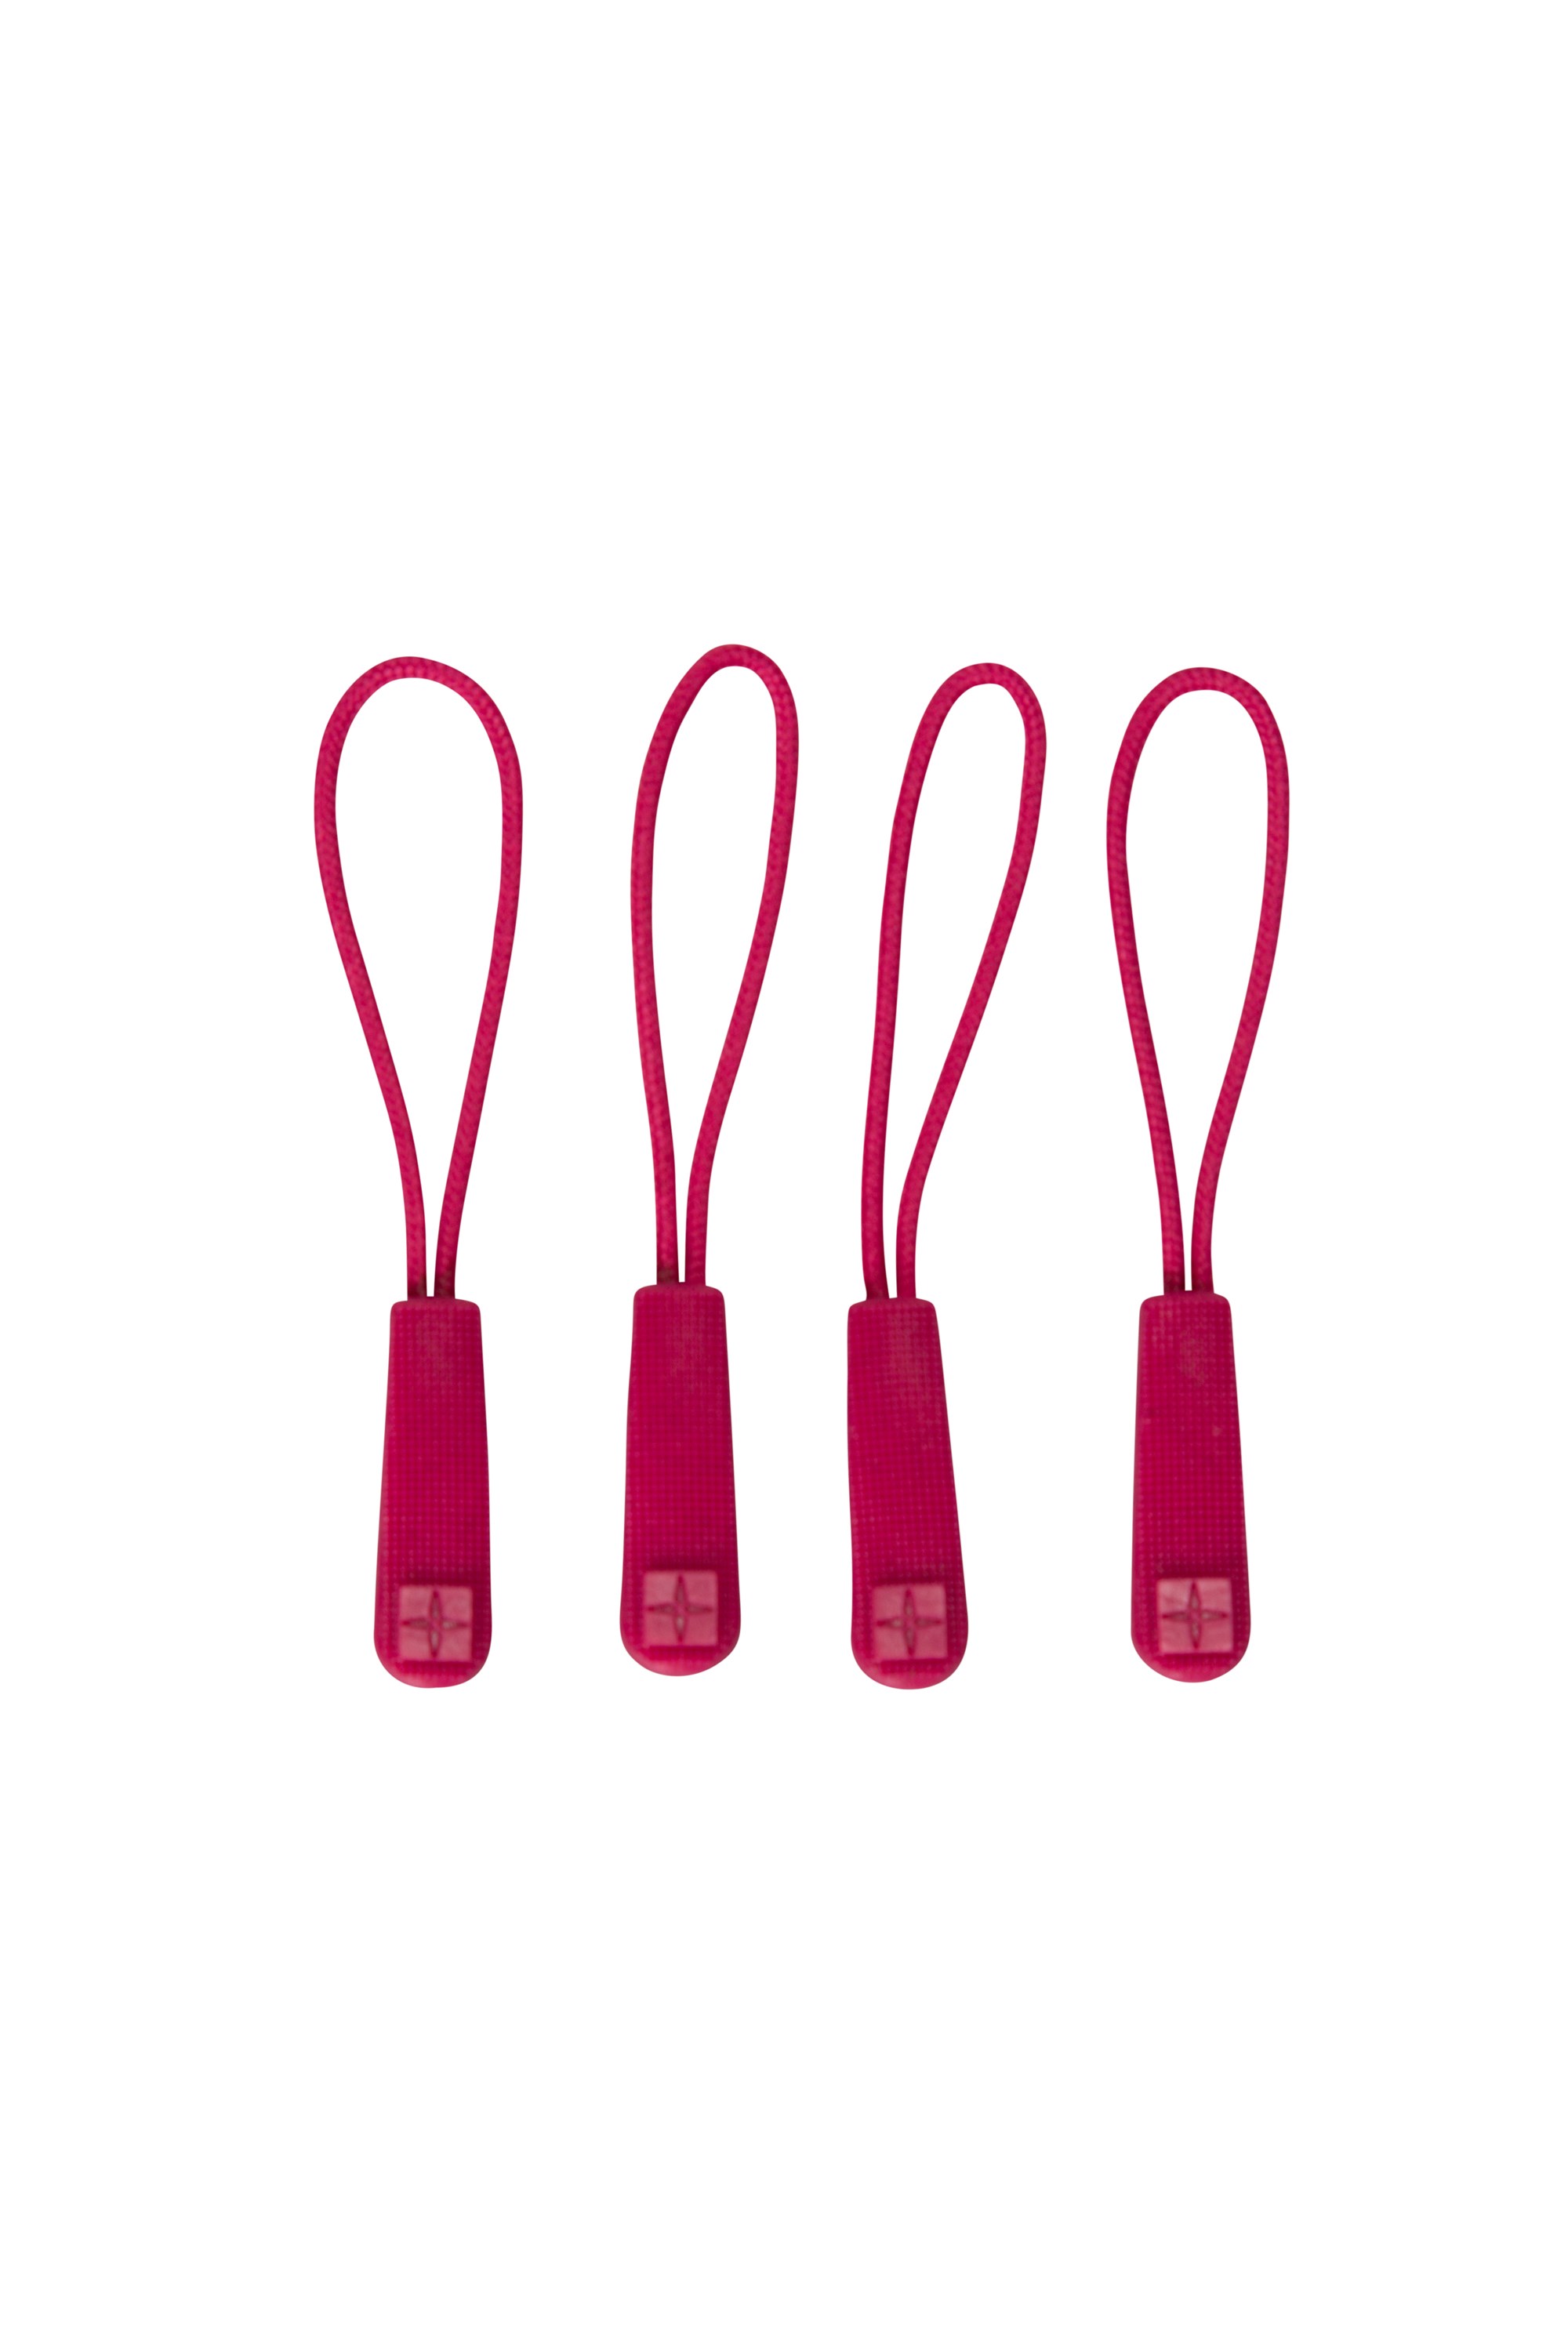 Mountain Warehouse Spare Zip Pullers 4 Pack Pink